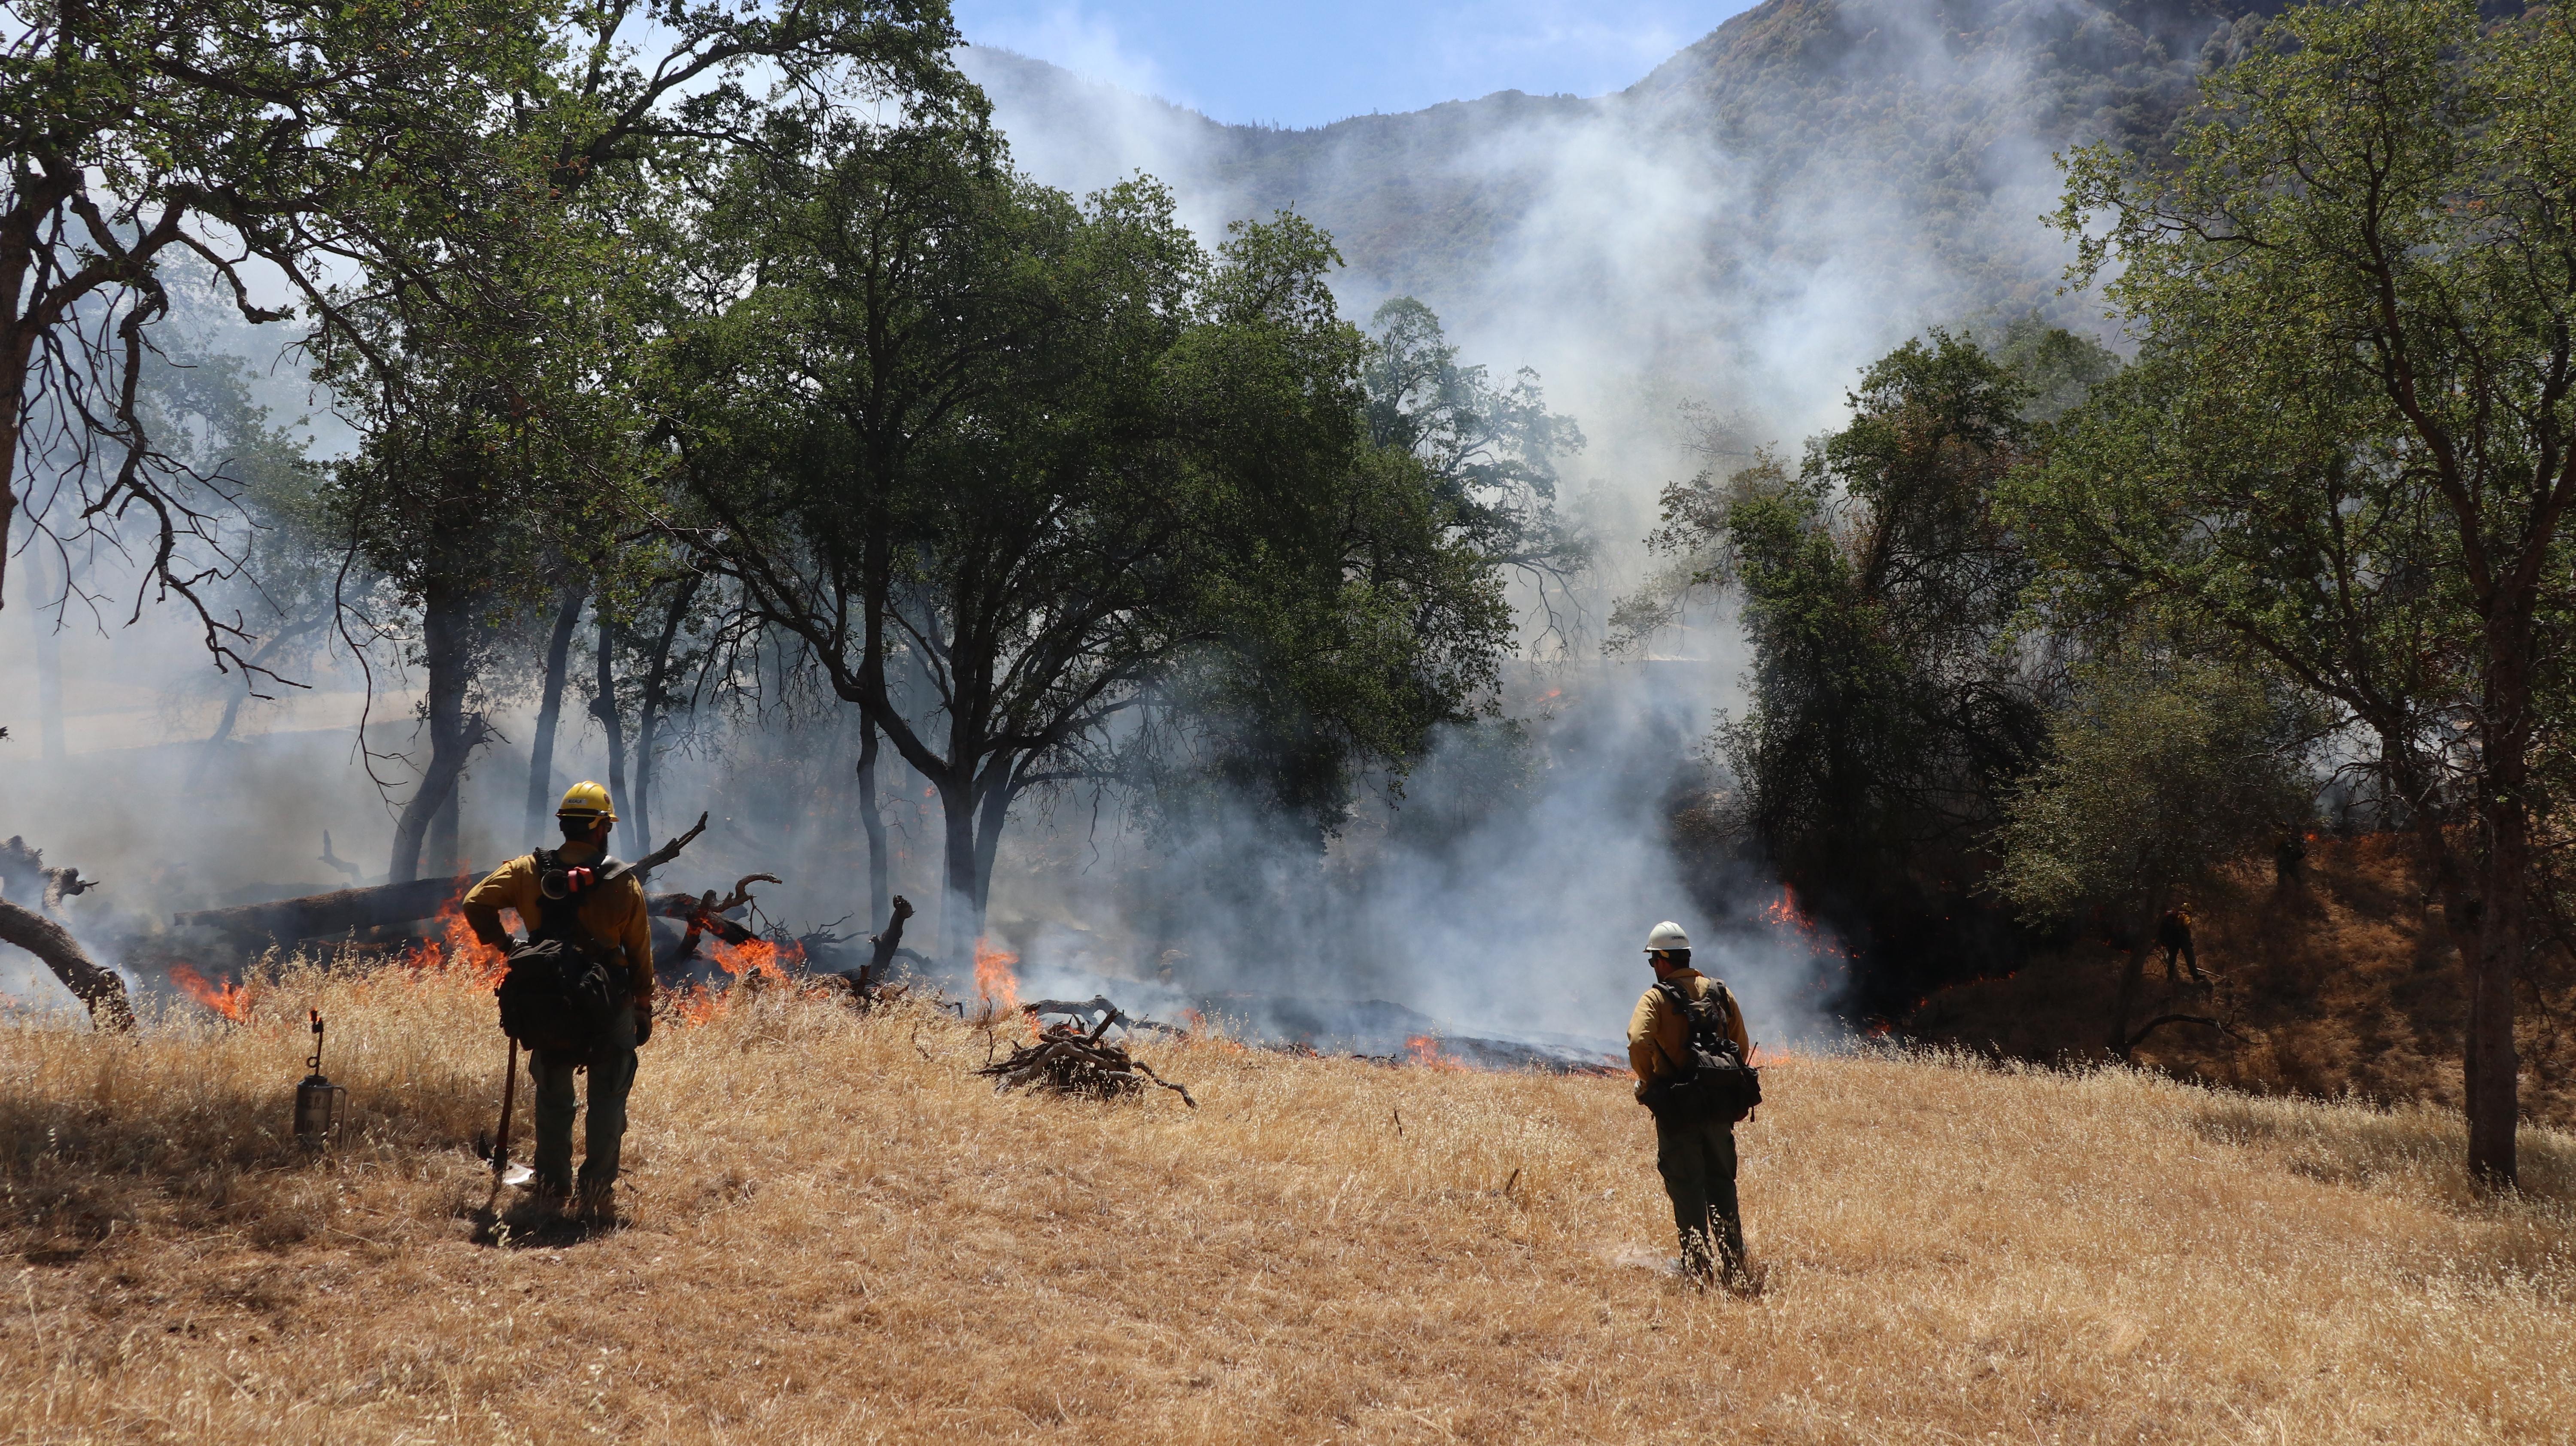 Two firefighters monitor the prescribed burn from a distance.